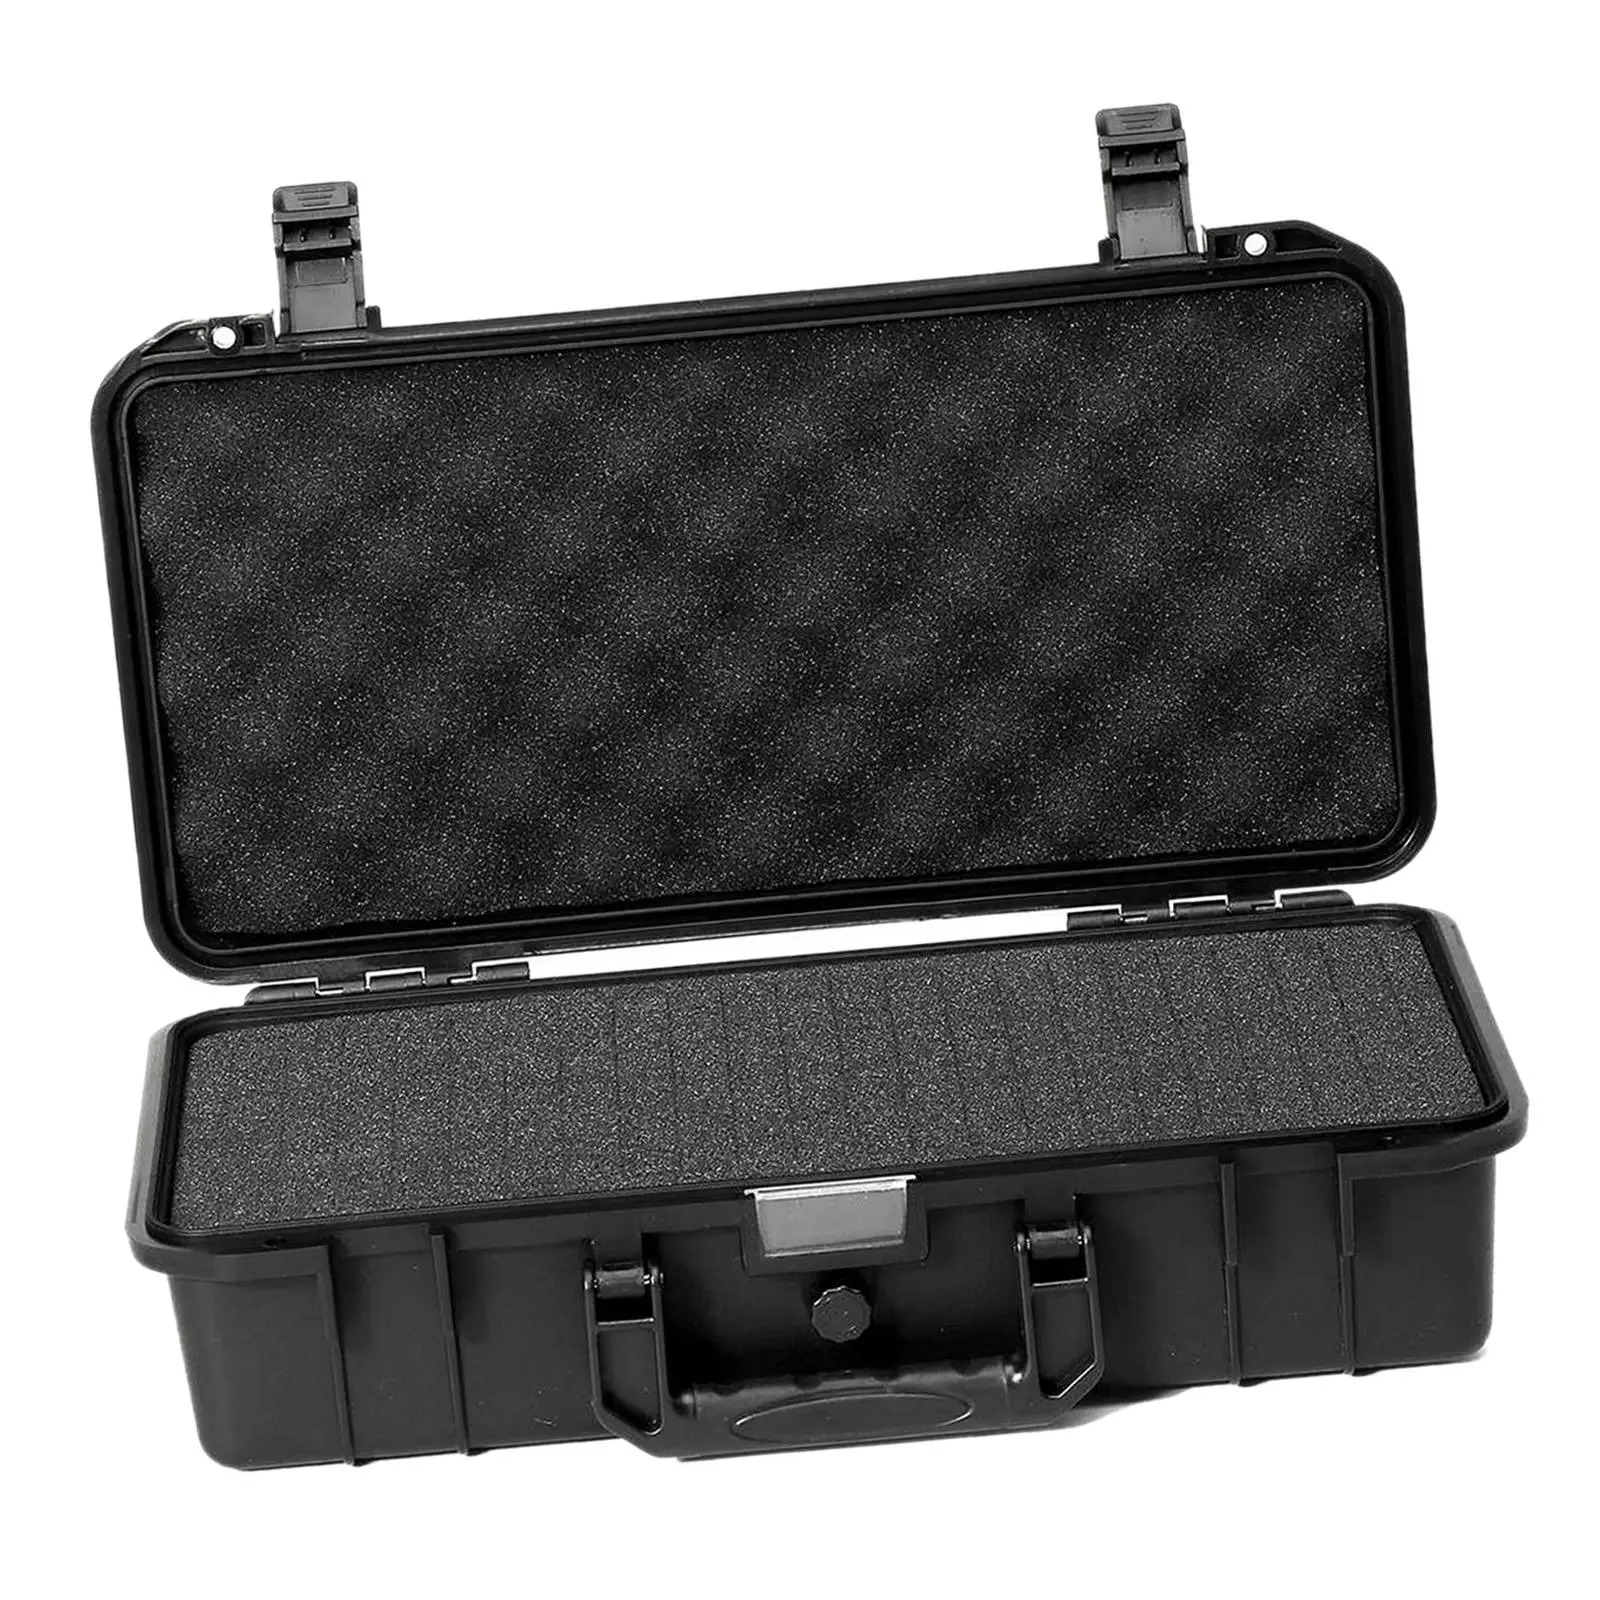 Universal Protect Toolbox Anti Impact Sealed Durable Lightweight Safety Box for Outdoor